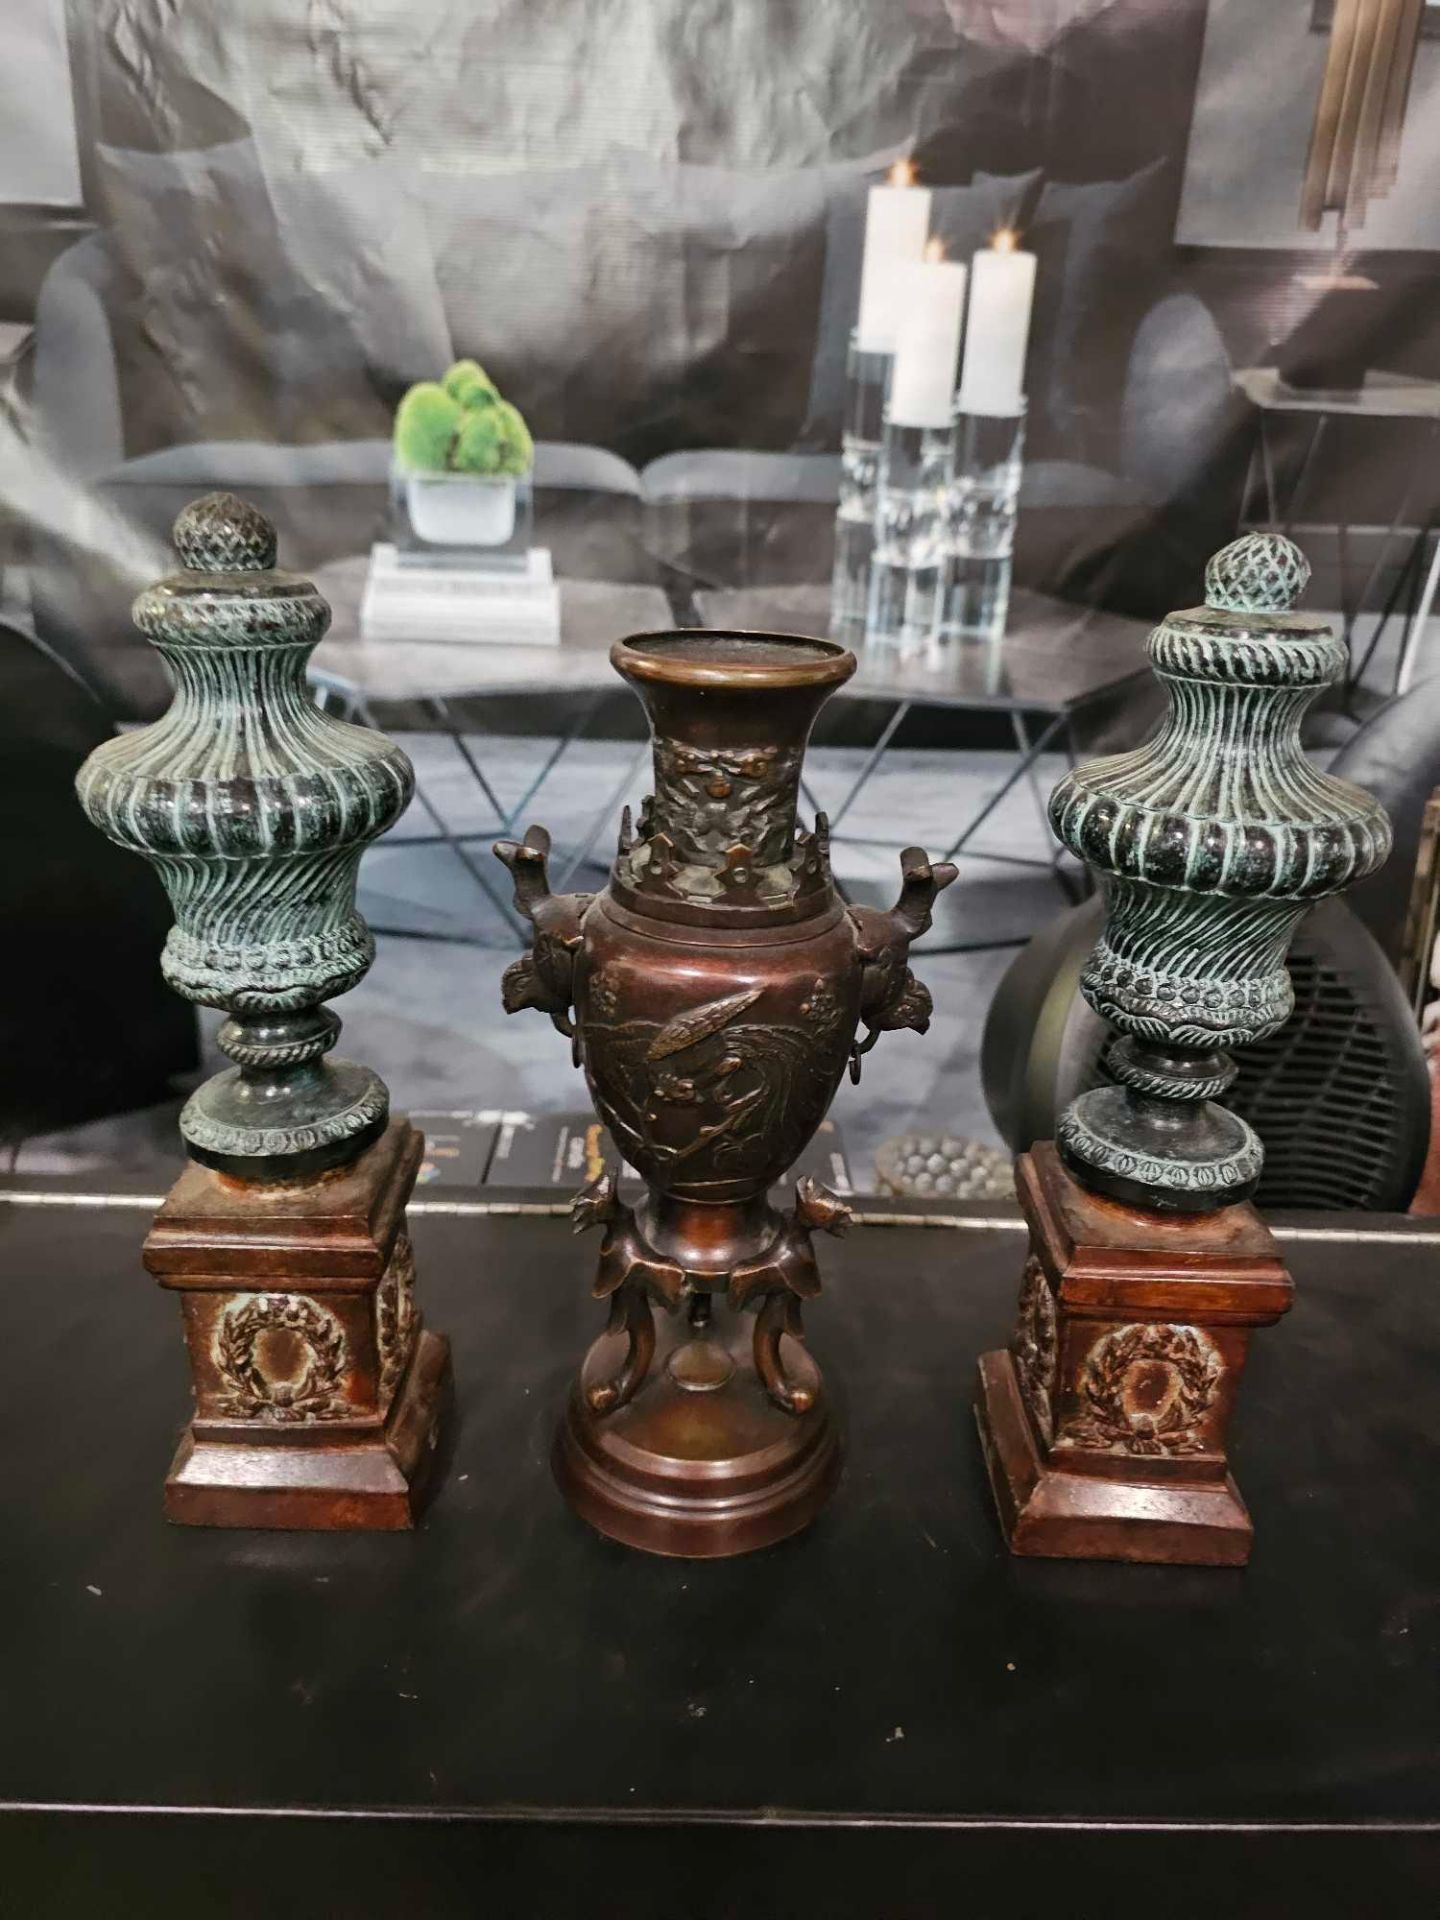 A Pair Of Decorative Empire Style Columns And A Bronzed Incense Vase